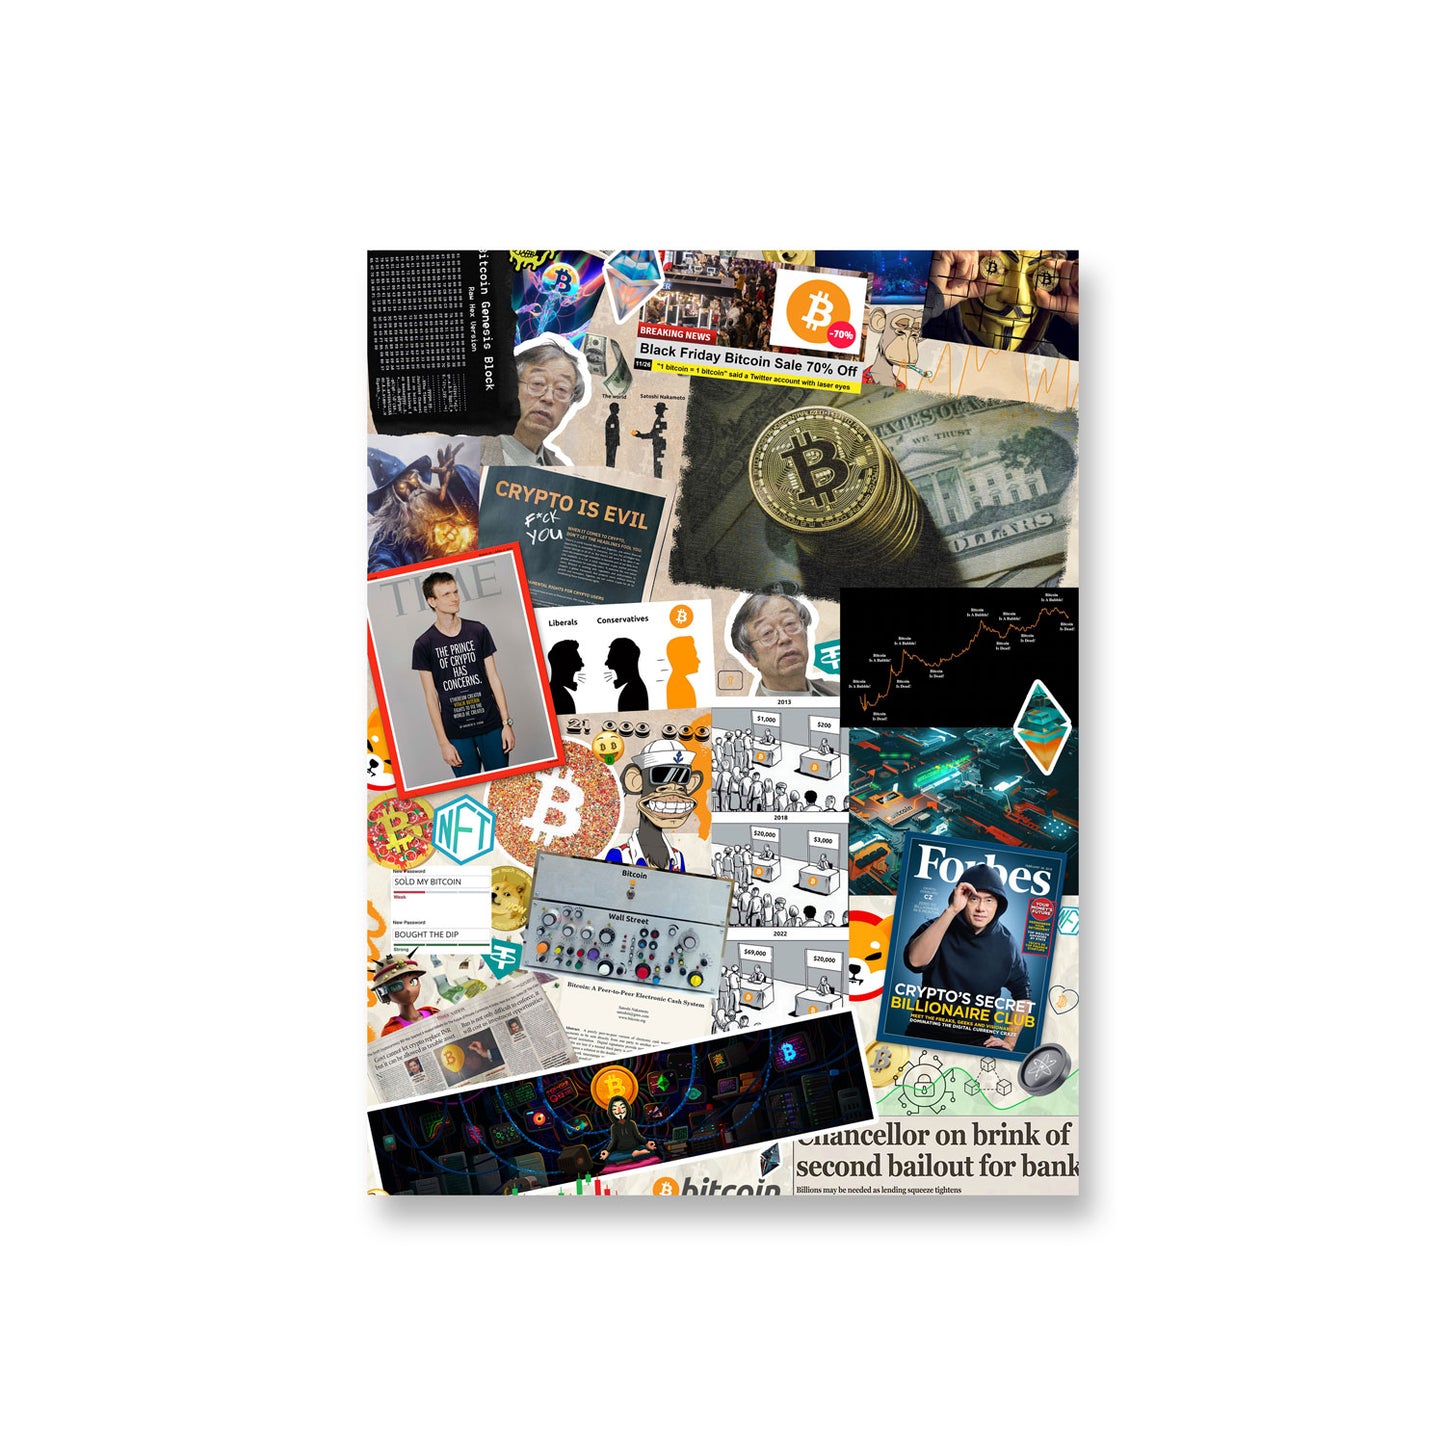 crypto collage meme poster web3 wall art inspired by bitcoin